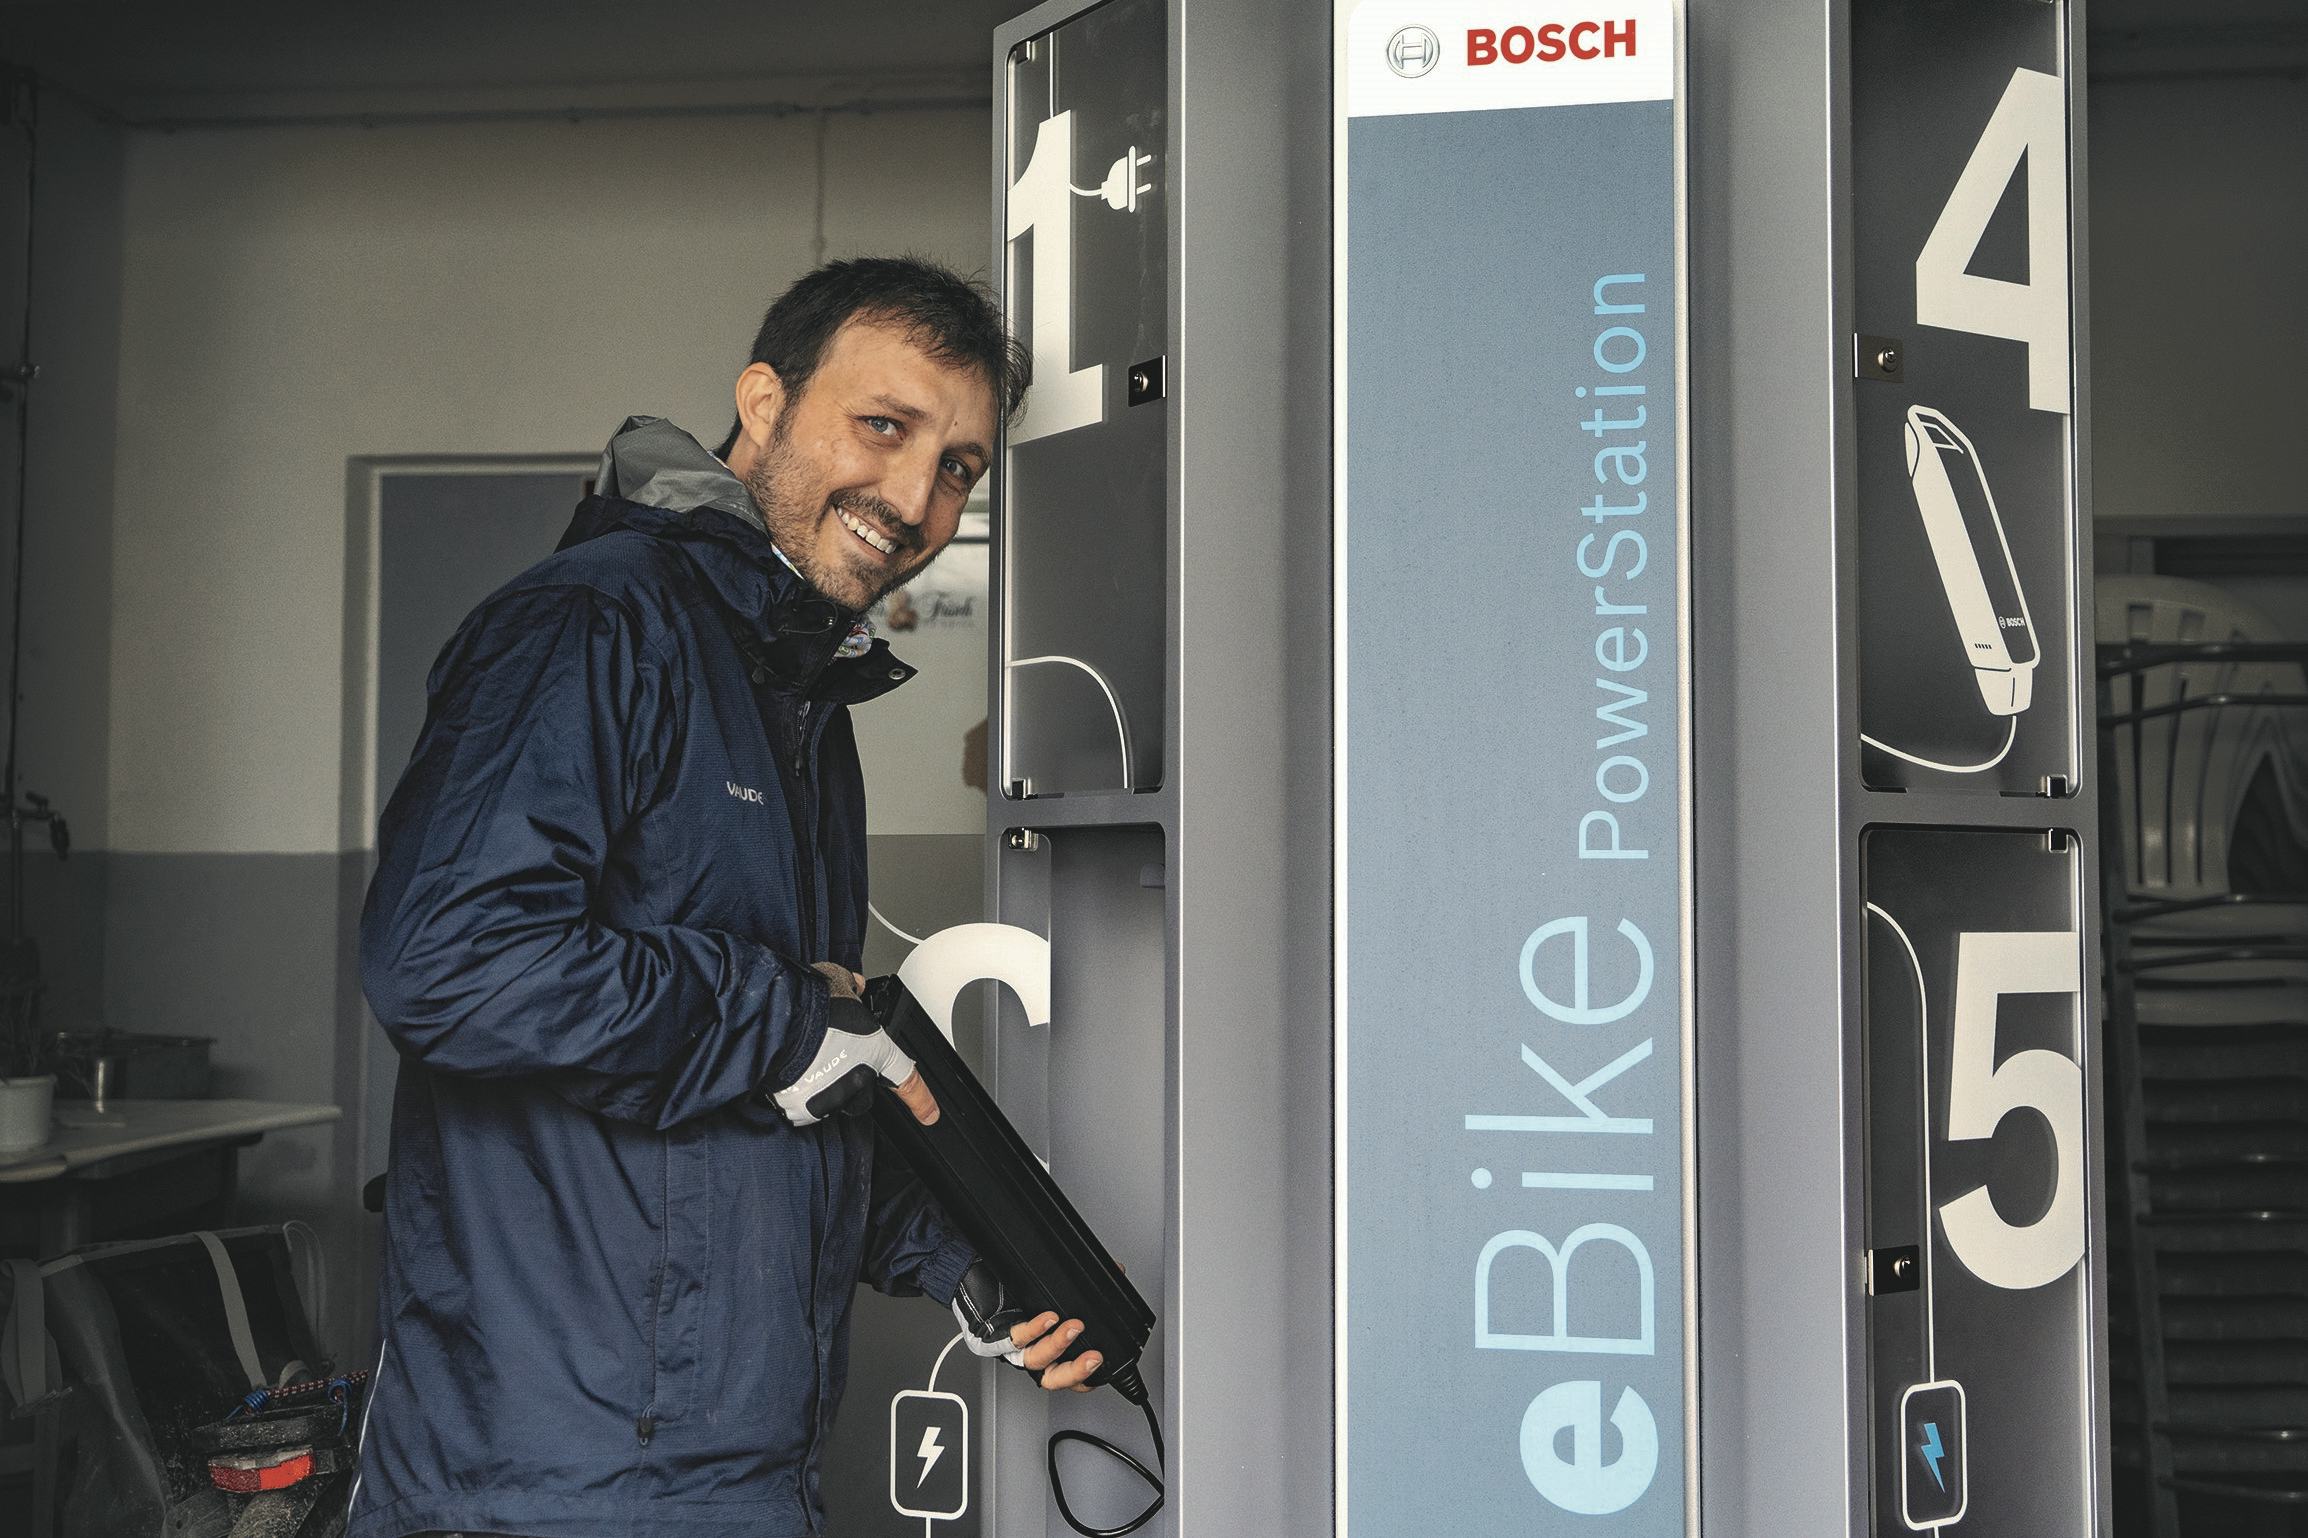 The Bosch PowerStation's are an important e-bike infrastructure contribution in the Swabian Alps as pedelec riders can charge their batteries free of charge. - Photo Bosch eBike Systems 